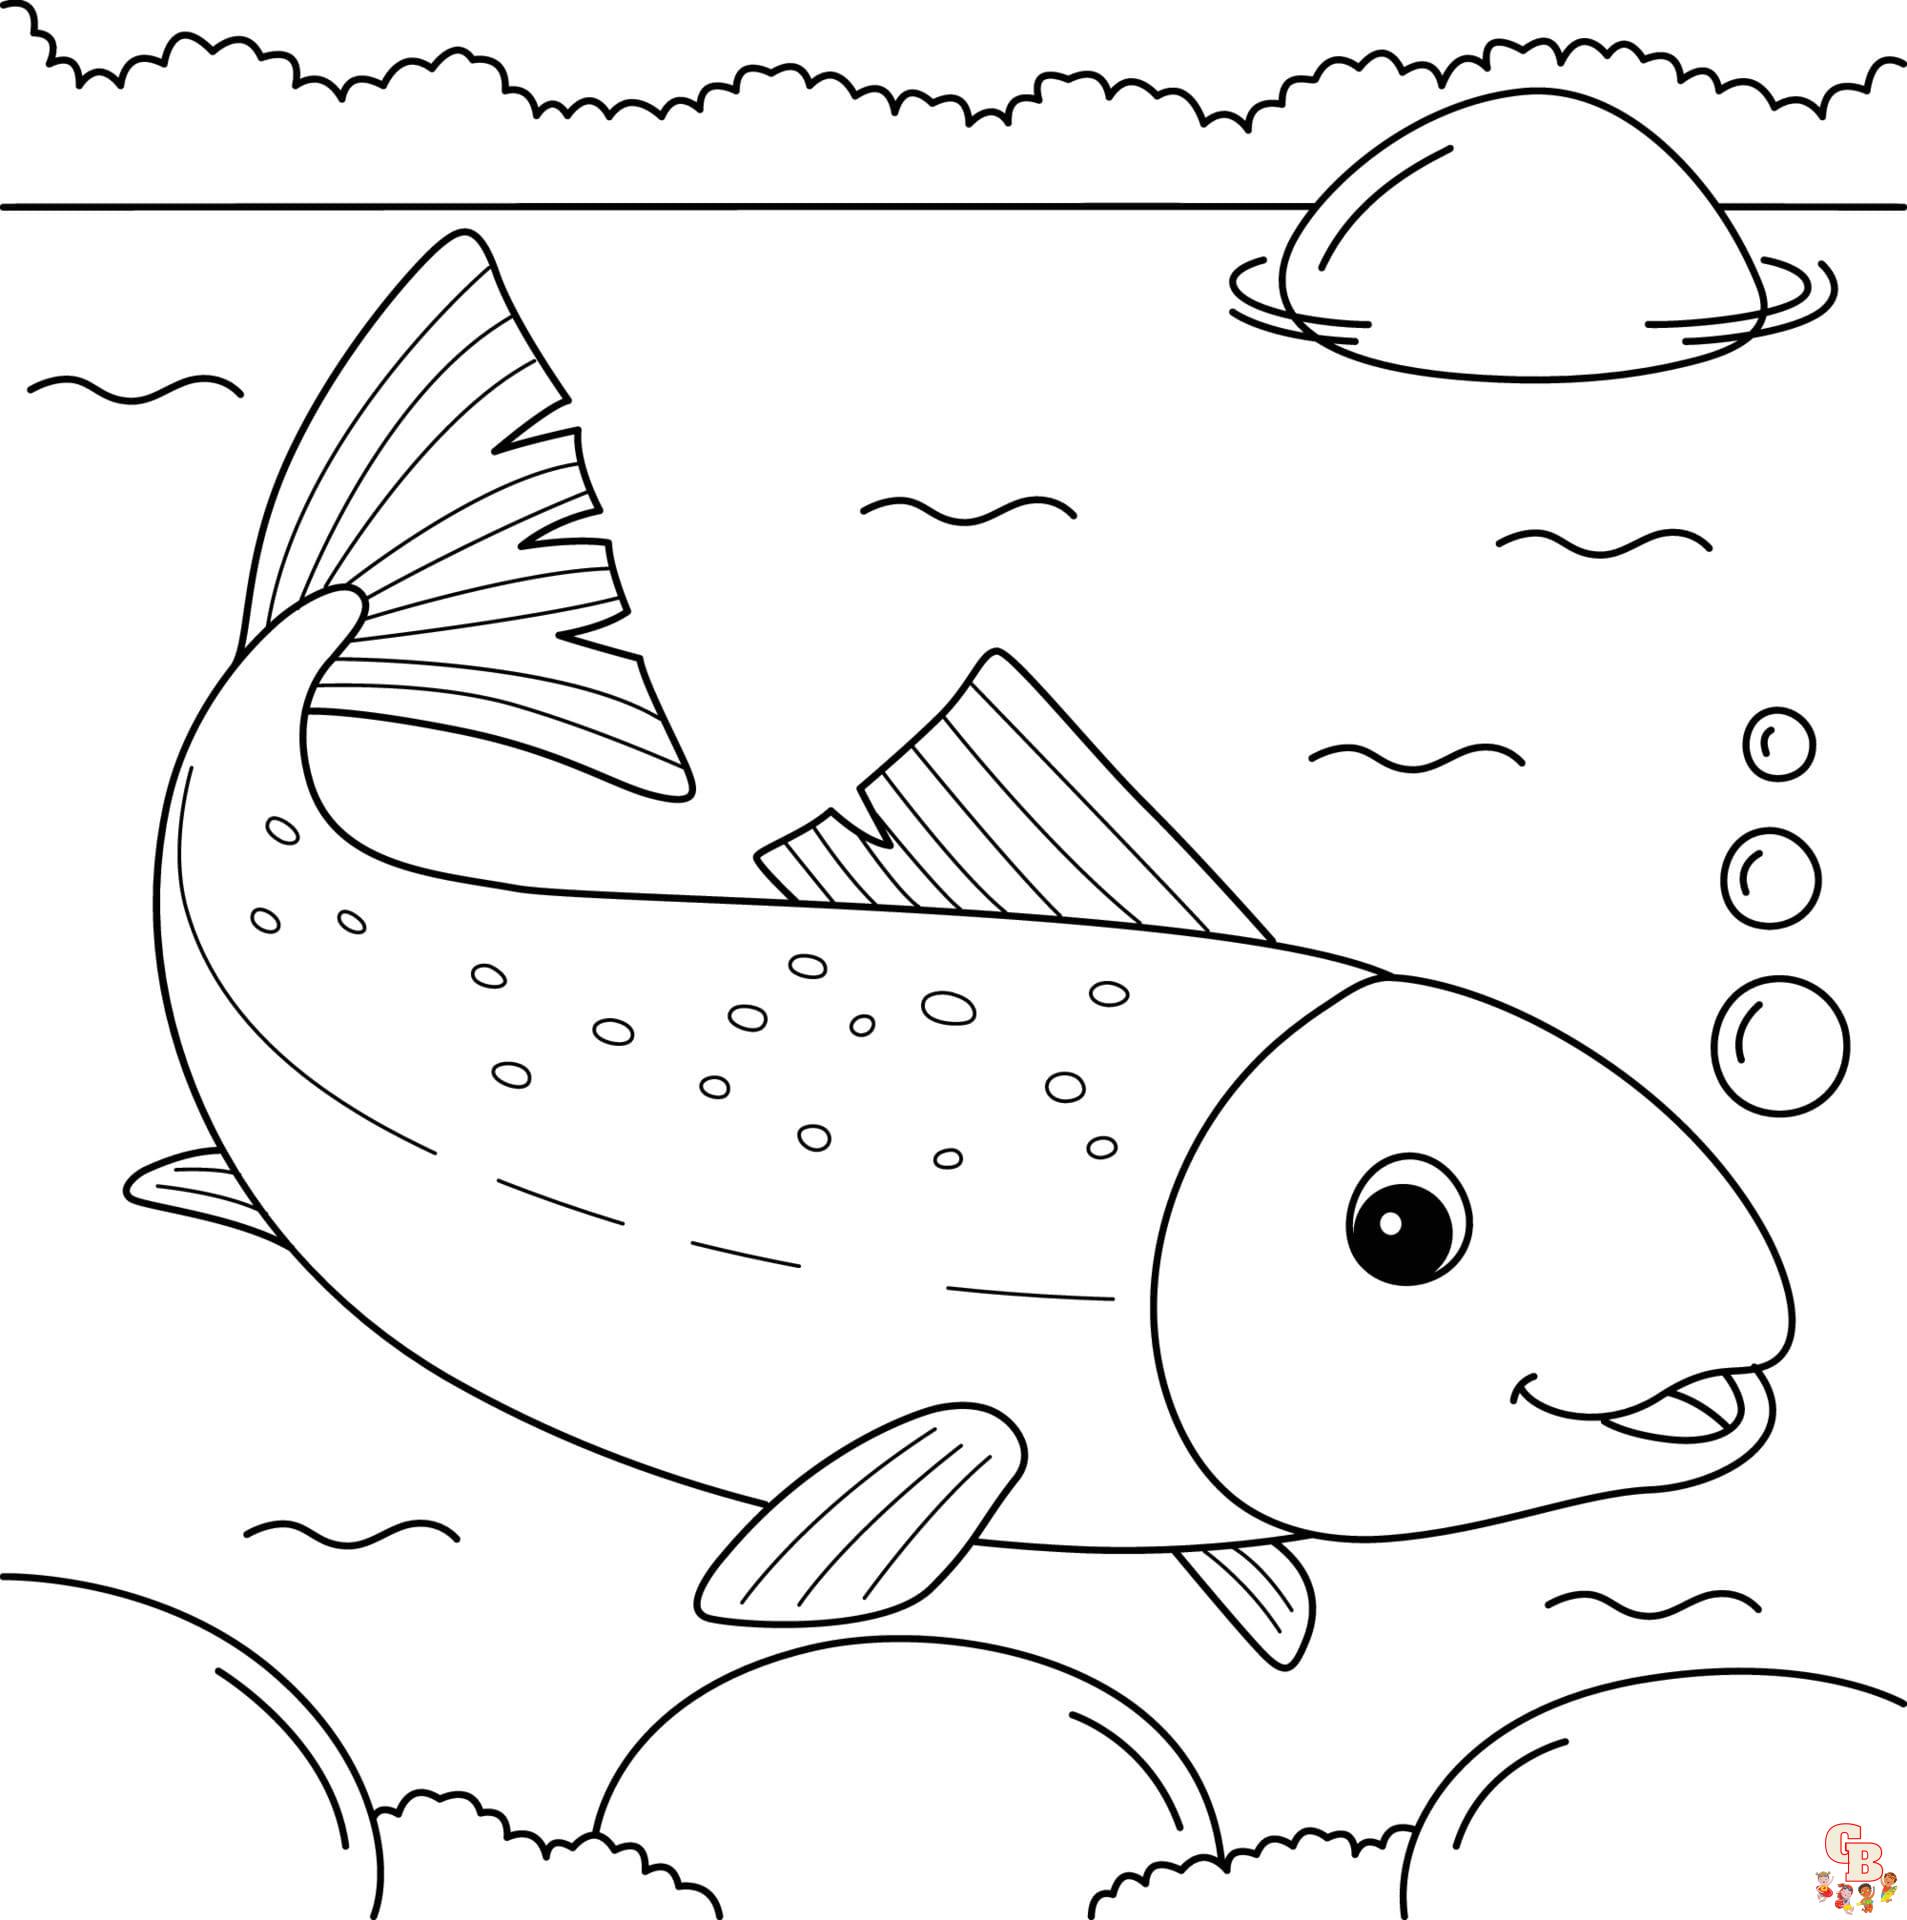 Salmon coloring pages free